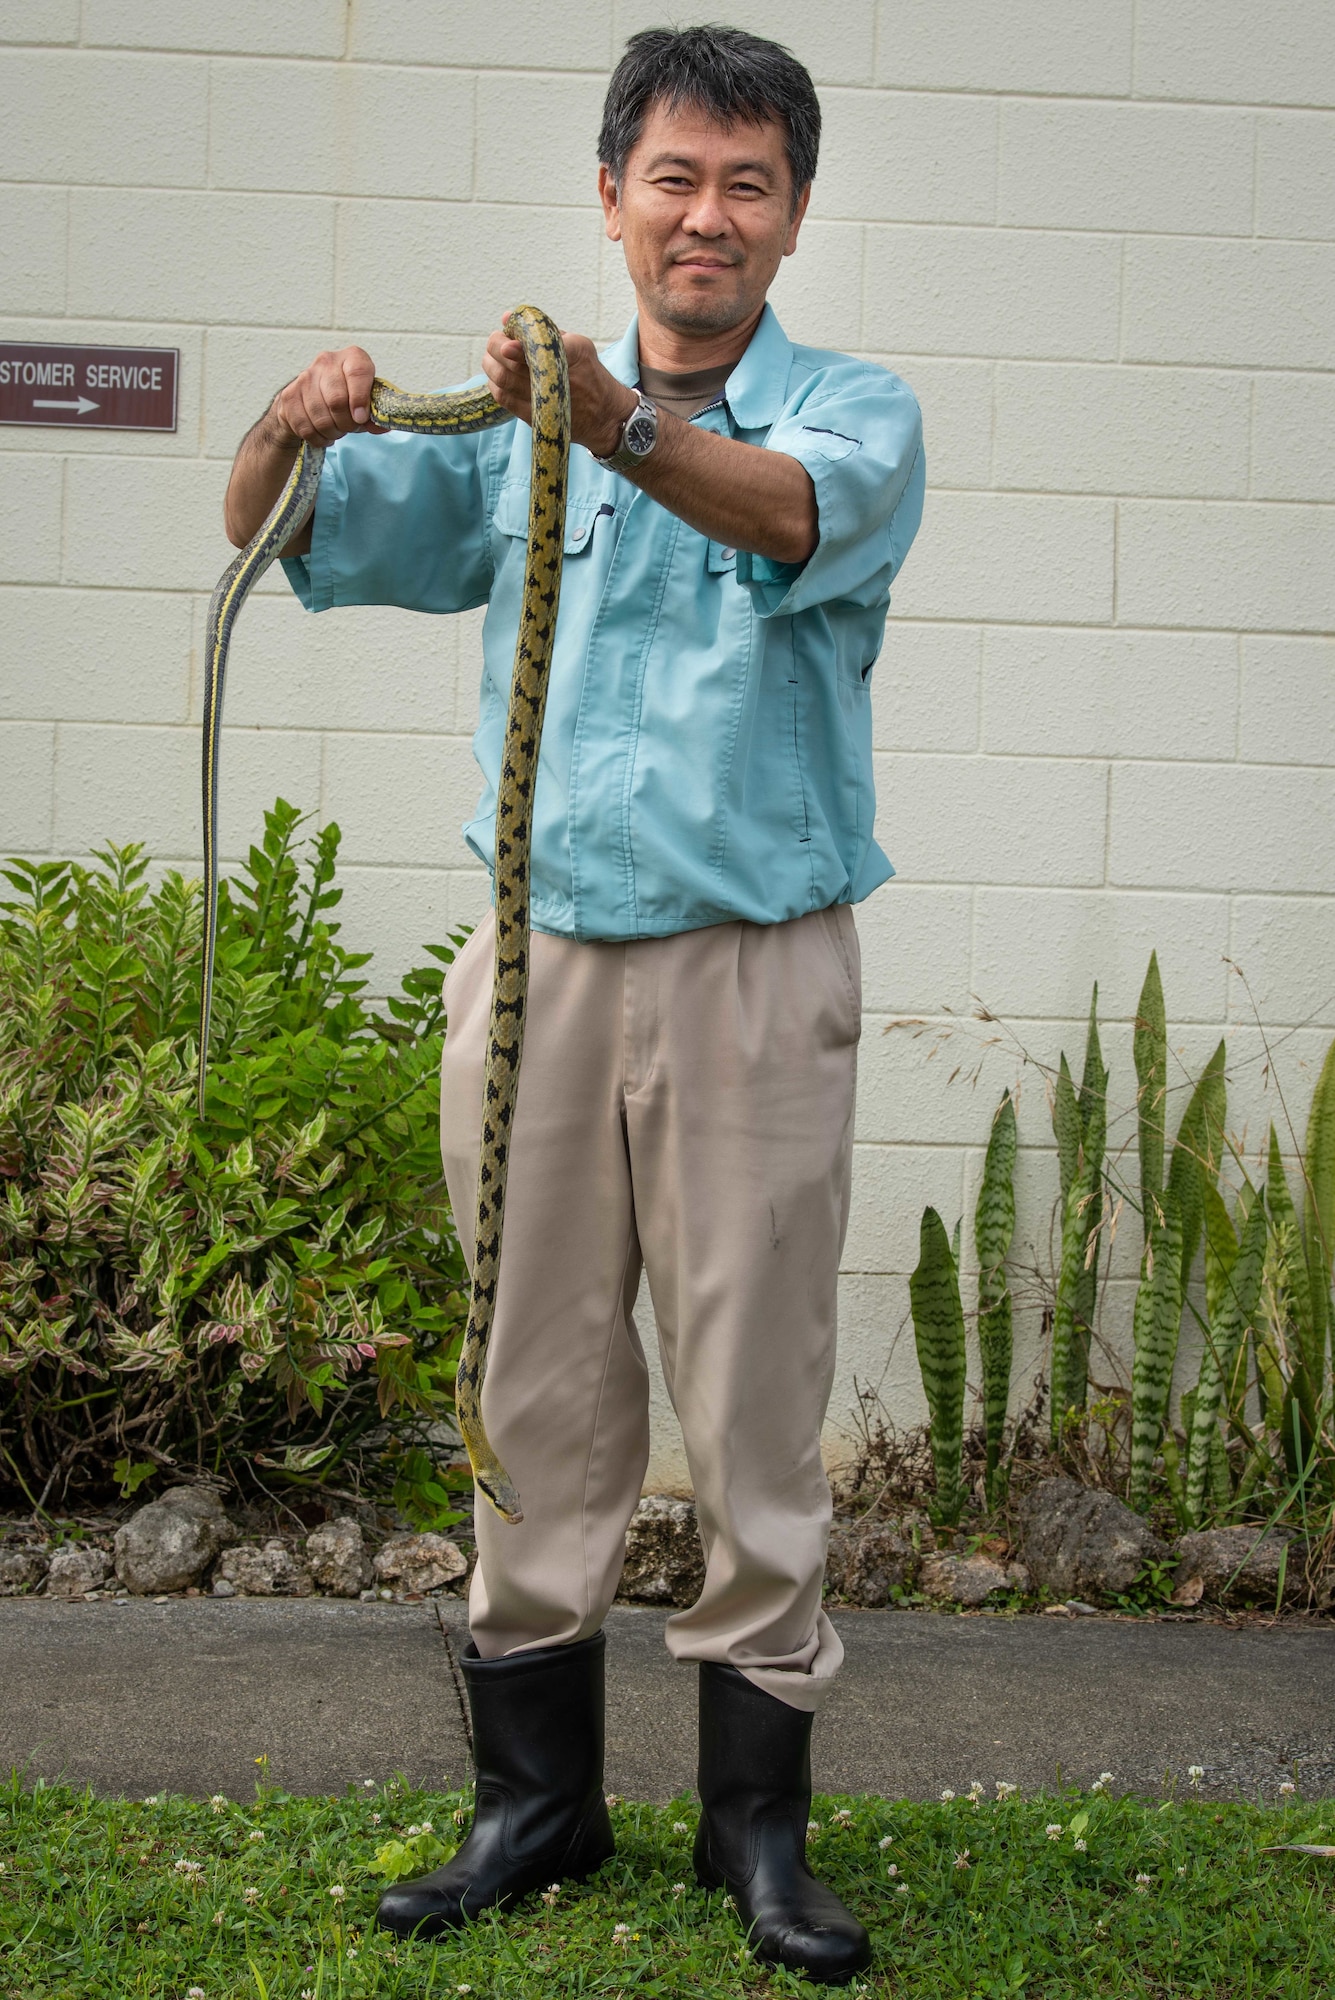 A Taiwanese Beauty Snake is held by a pest management technician at the on-base Entomology Pest Management Section, June 5, 2019, at Kadena Air Base, Japan. Import, transport and keeping of Taiwanese Beauty Snakes is strictly prohibited by Japan's Invasive Alien Species Act. (U.S. Air Force photo by Senior Airman Kristan Campbell)